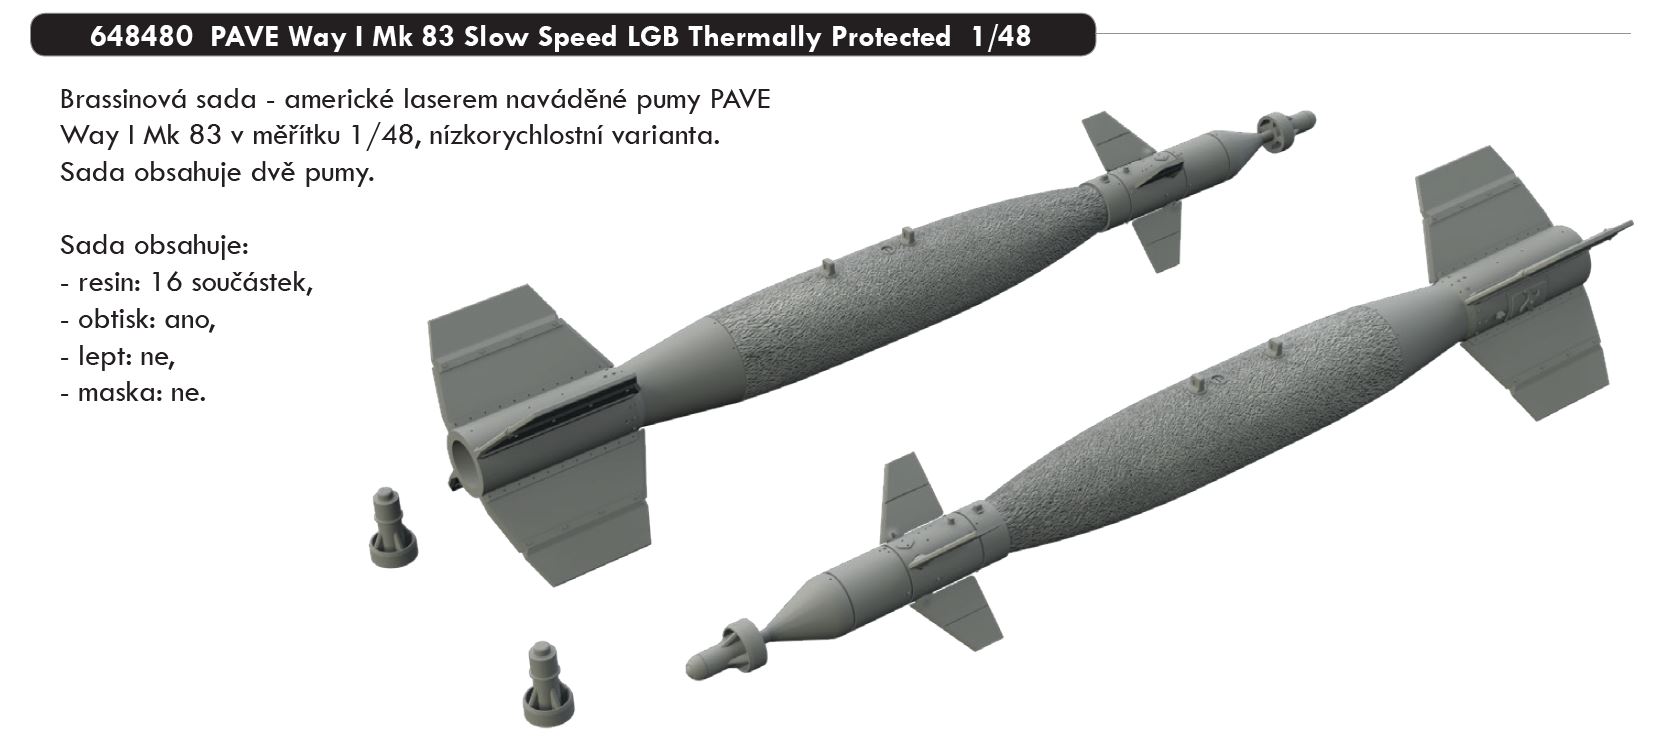 1/48 PAVE Way I Mk 83 Slow Speed LGB Thermally Protected